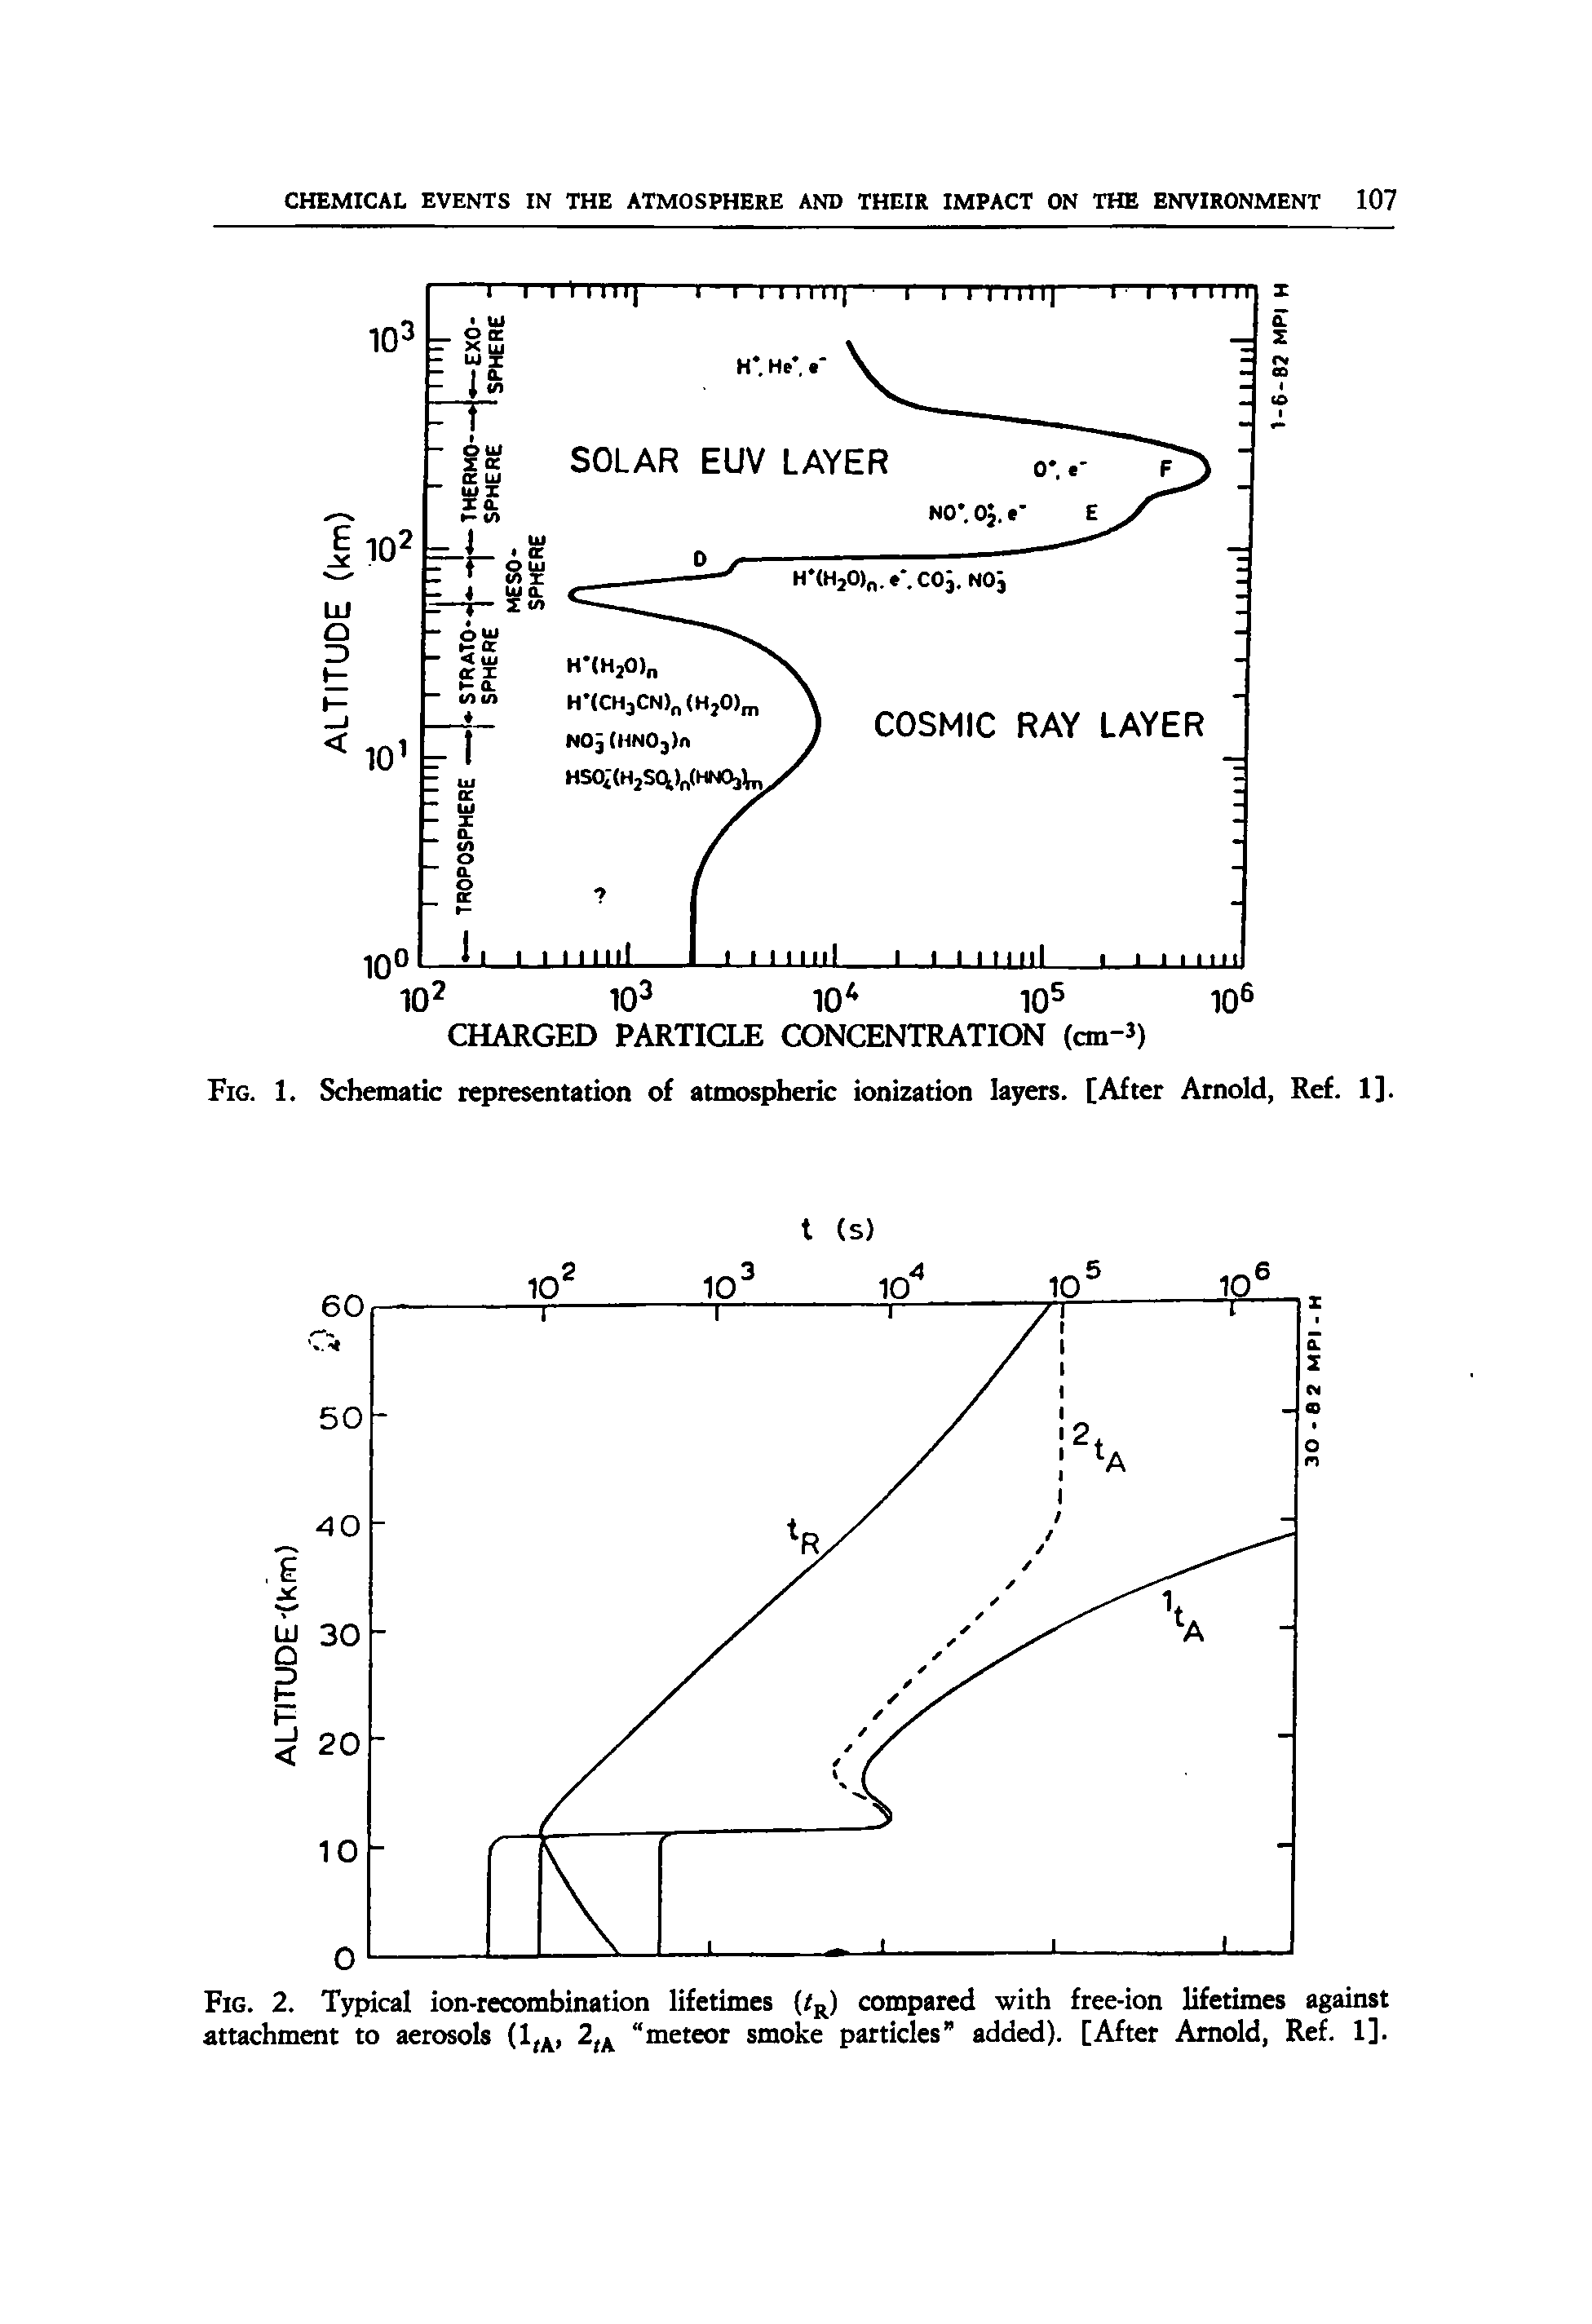 Fig. 1. Schematic representation of atmospheric ionization layers. [After Arnold, Ref. 1].